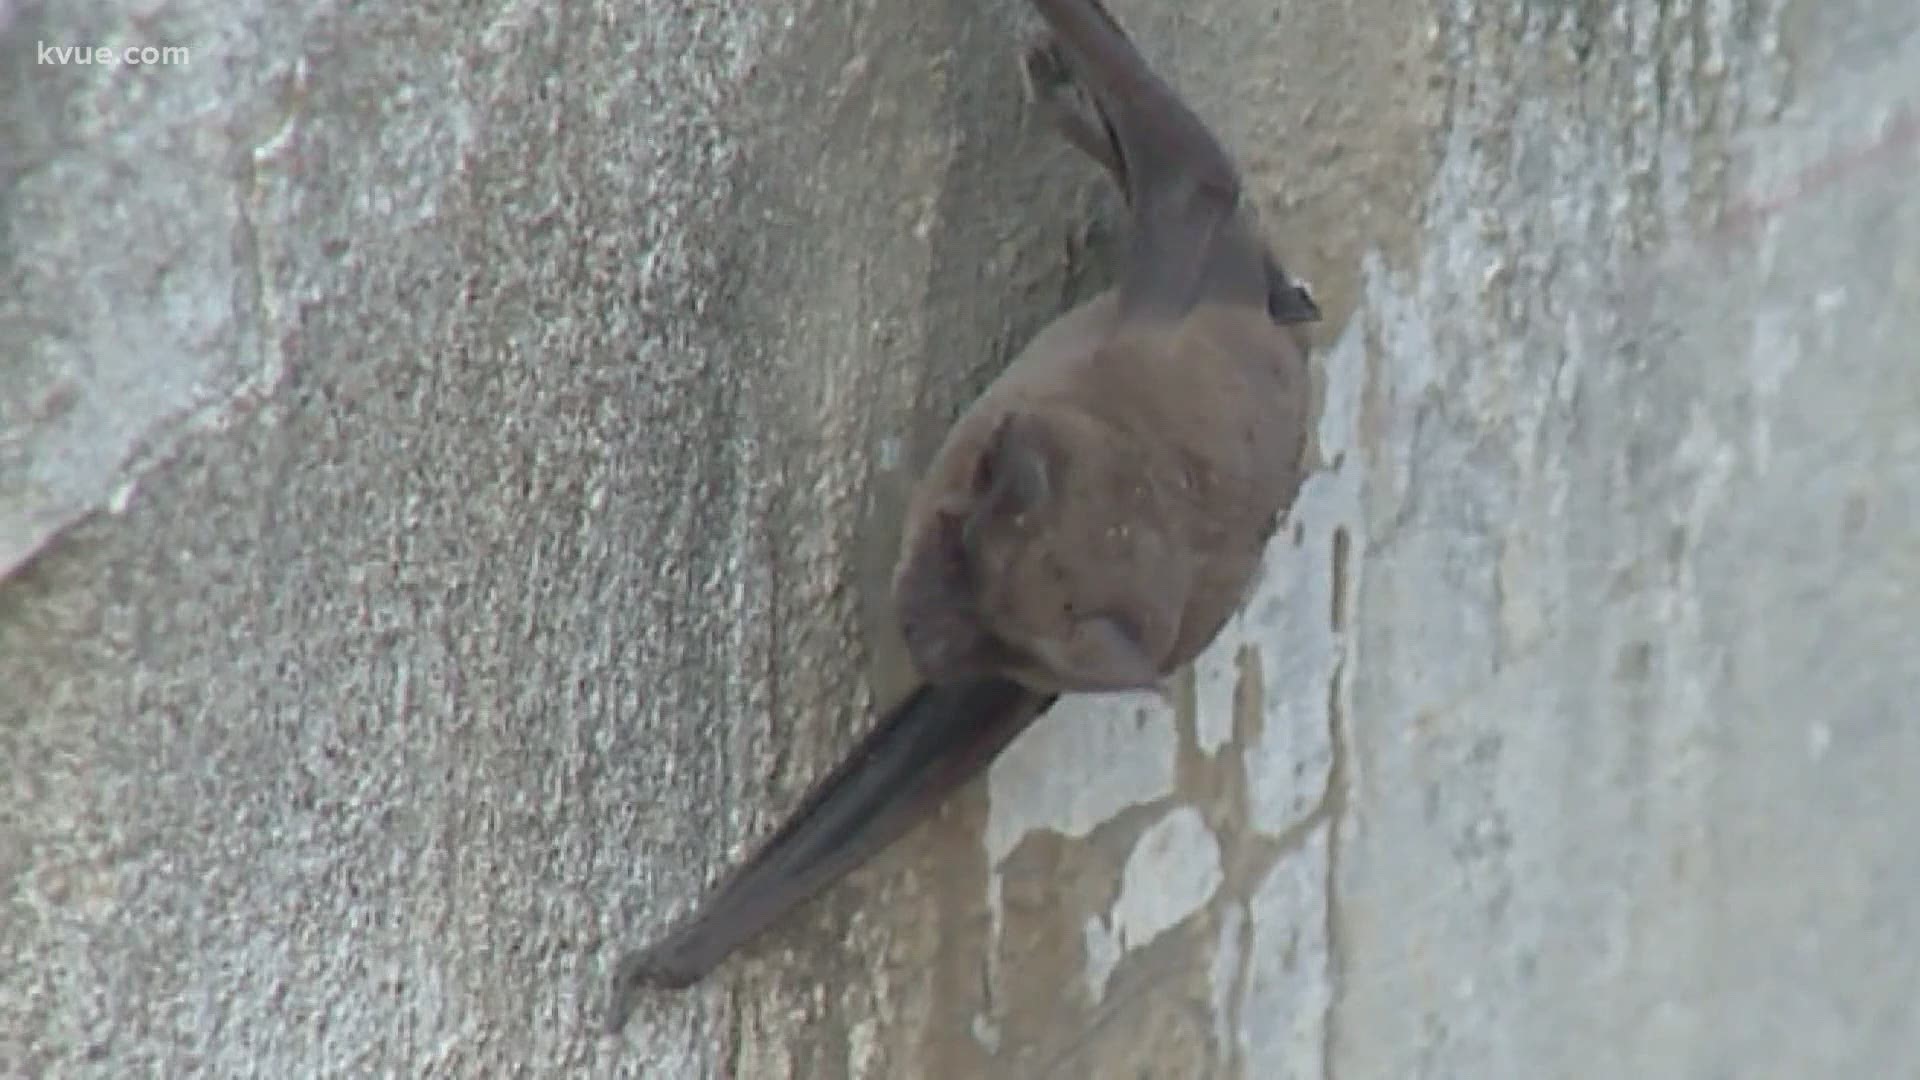 The deep freeze last week affected the Texas ecosystem. Many bats in Austin became weak and lost their grip.